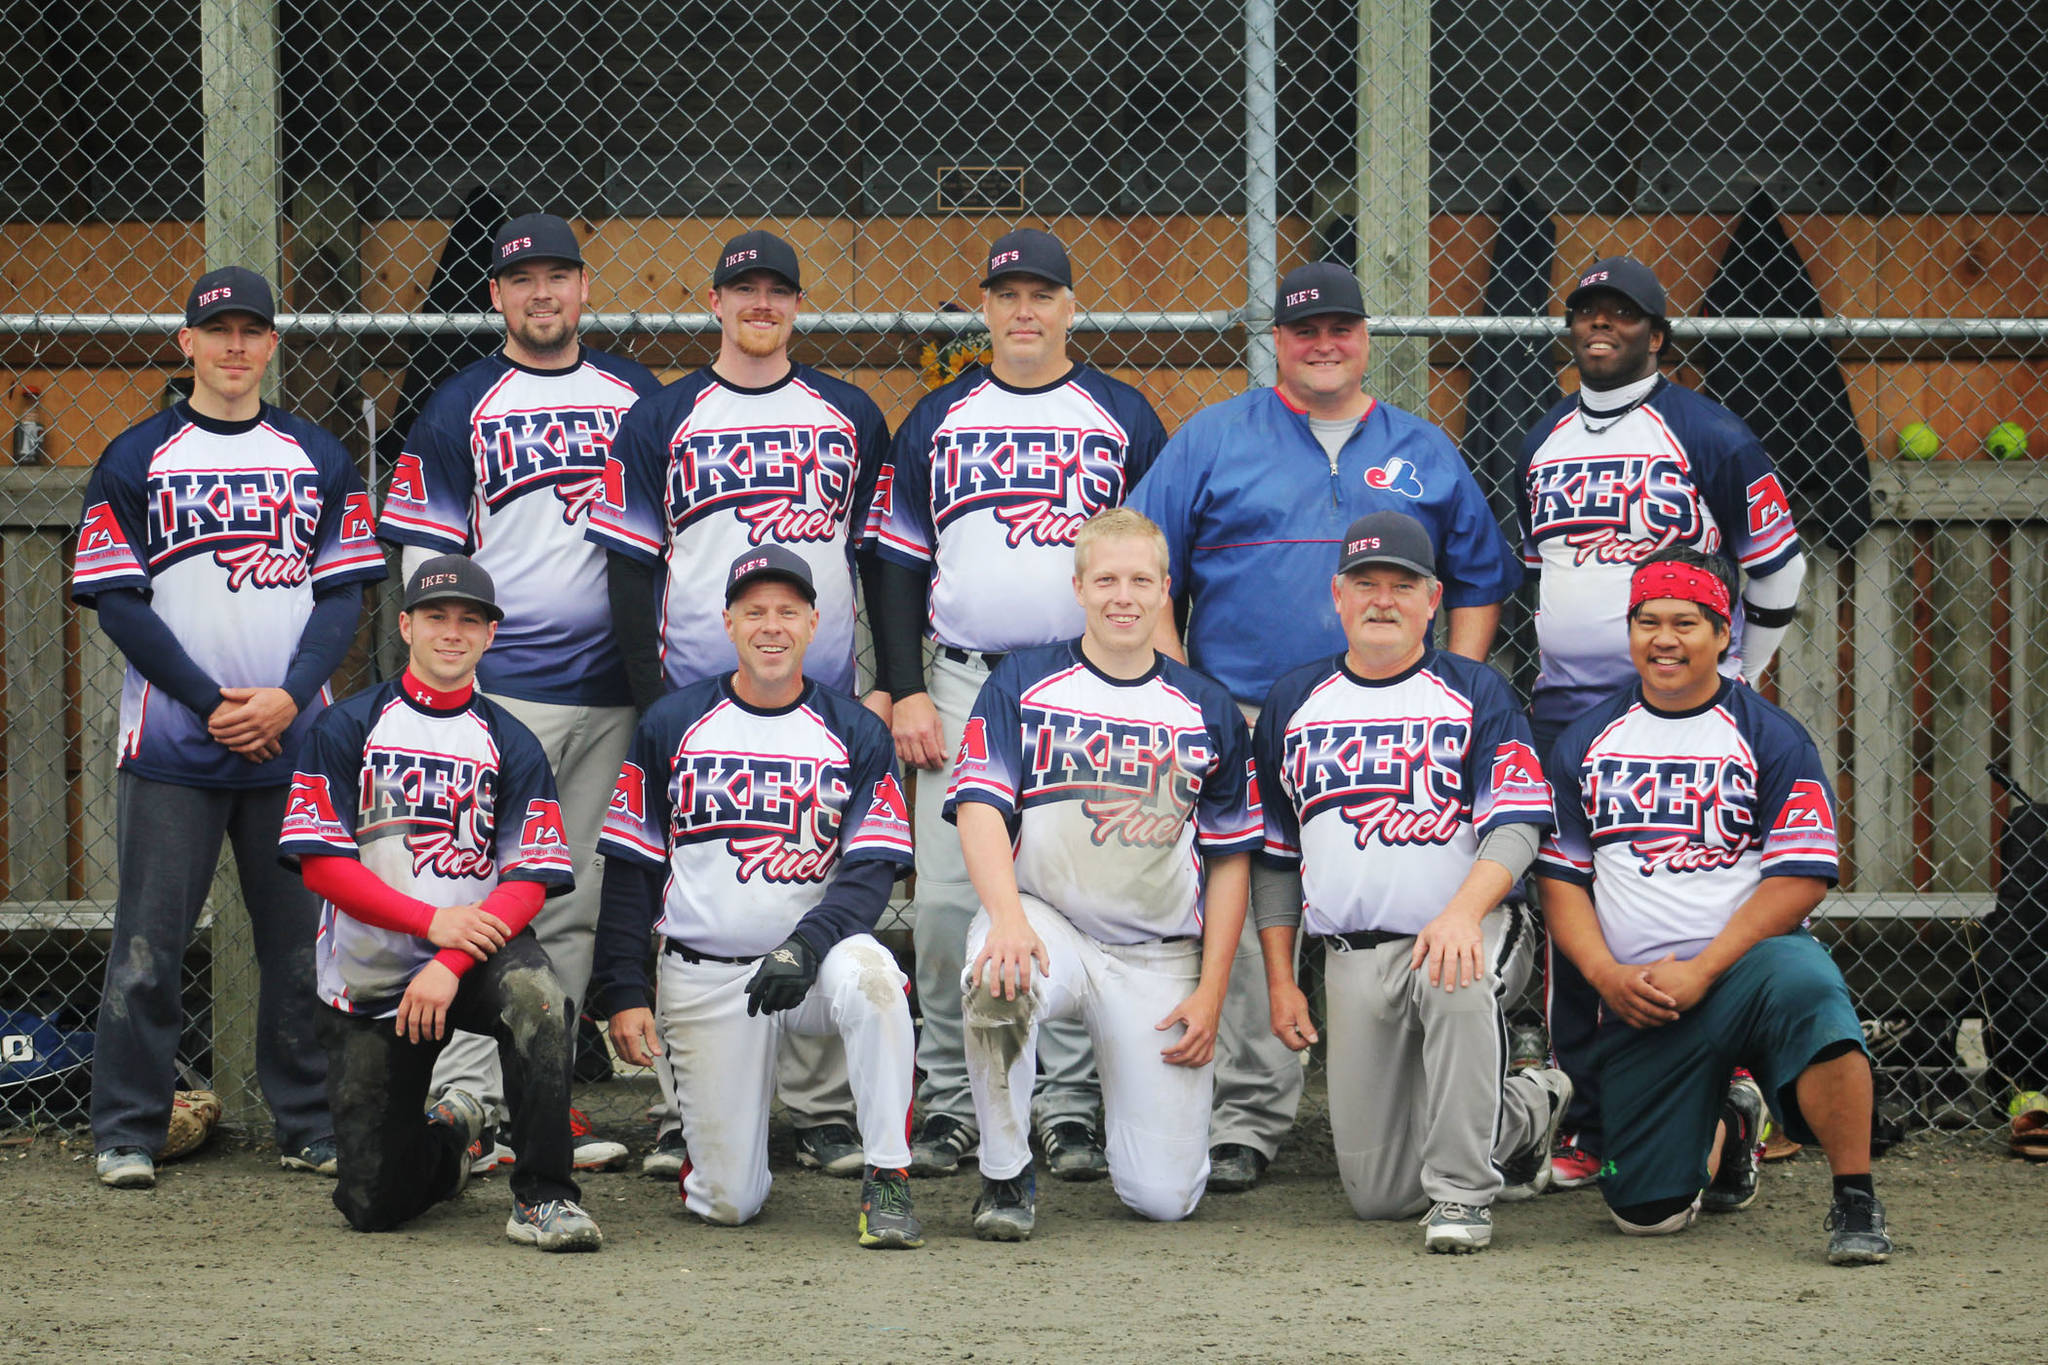 The 42nd annual Jamie Parsons Memorial Rainball Tournament Upper Men Champs were Ike’s Fuel. (Courtesy photo)